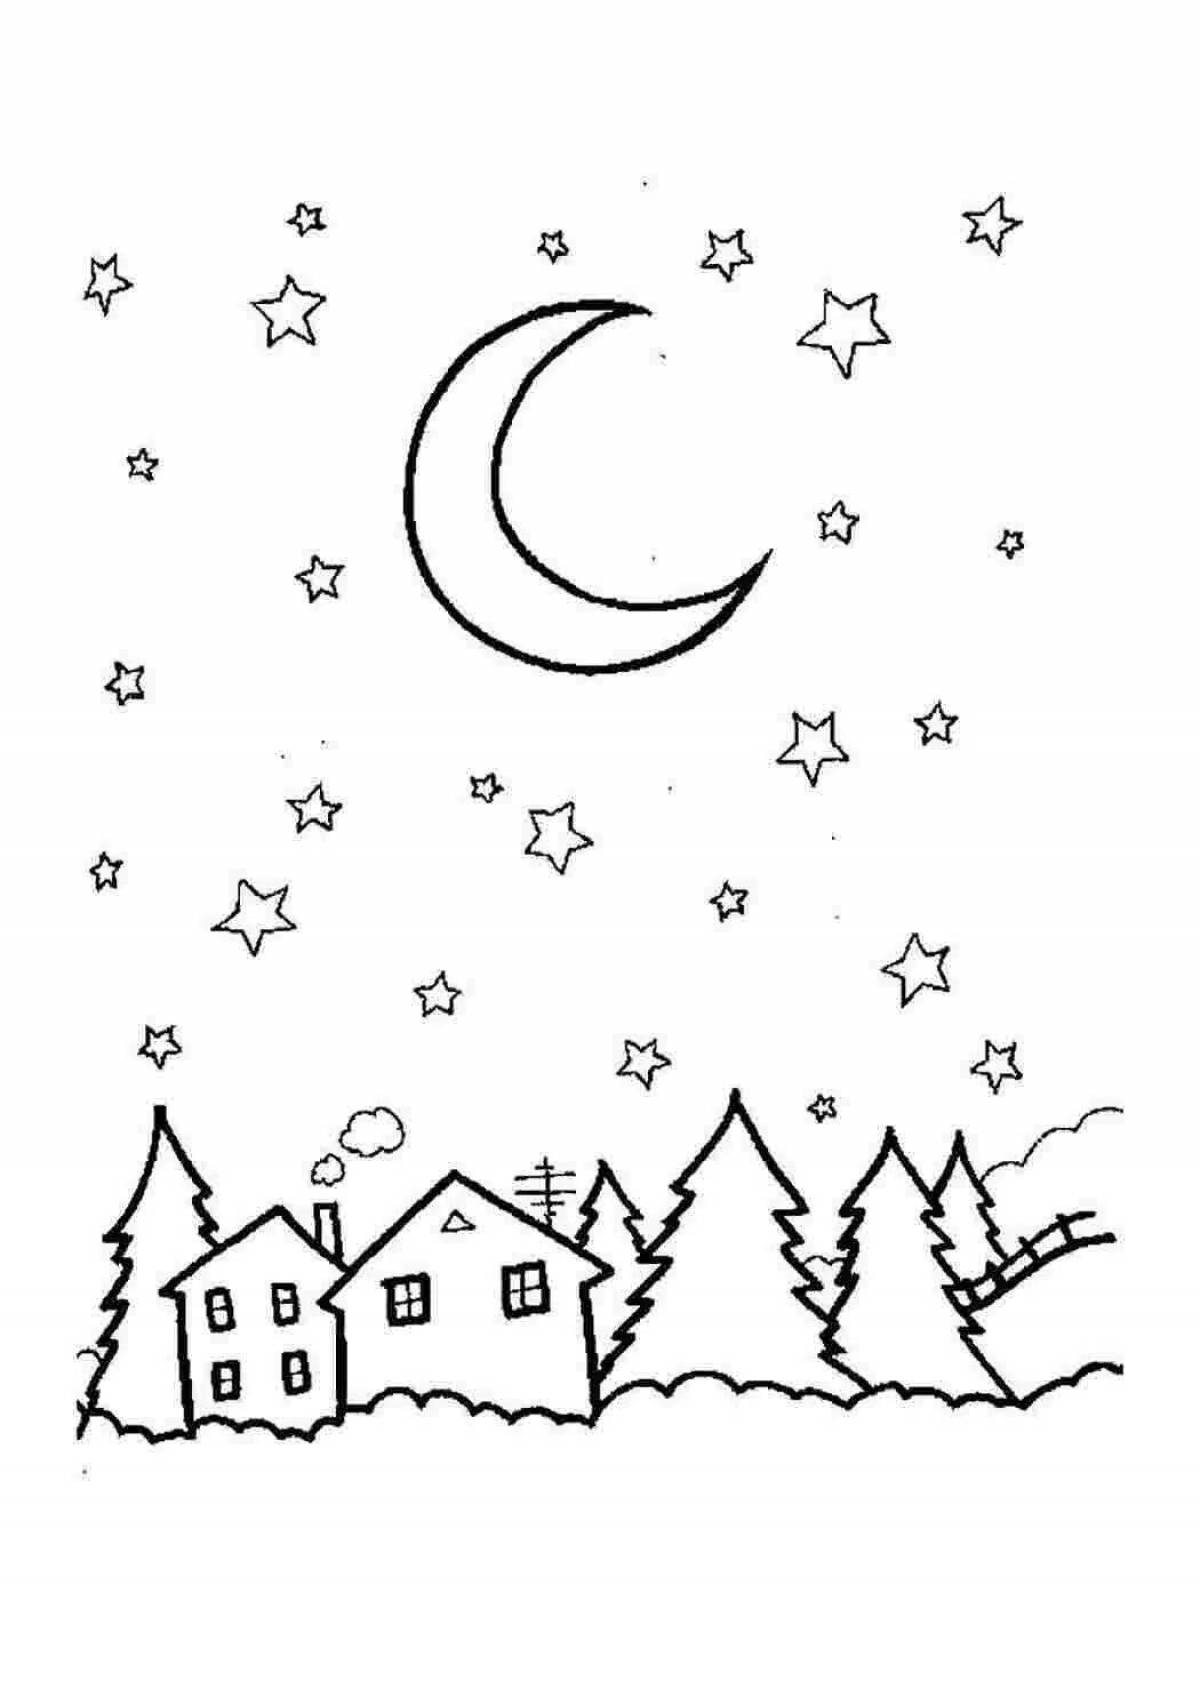 Exalted starry sky coloring book for kids